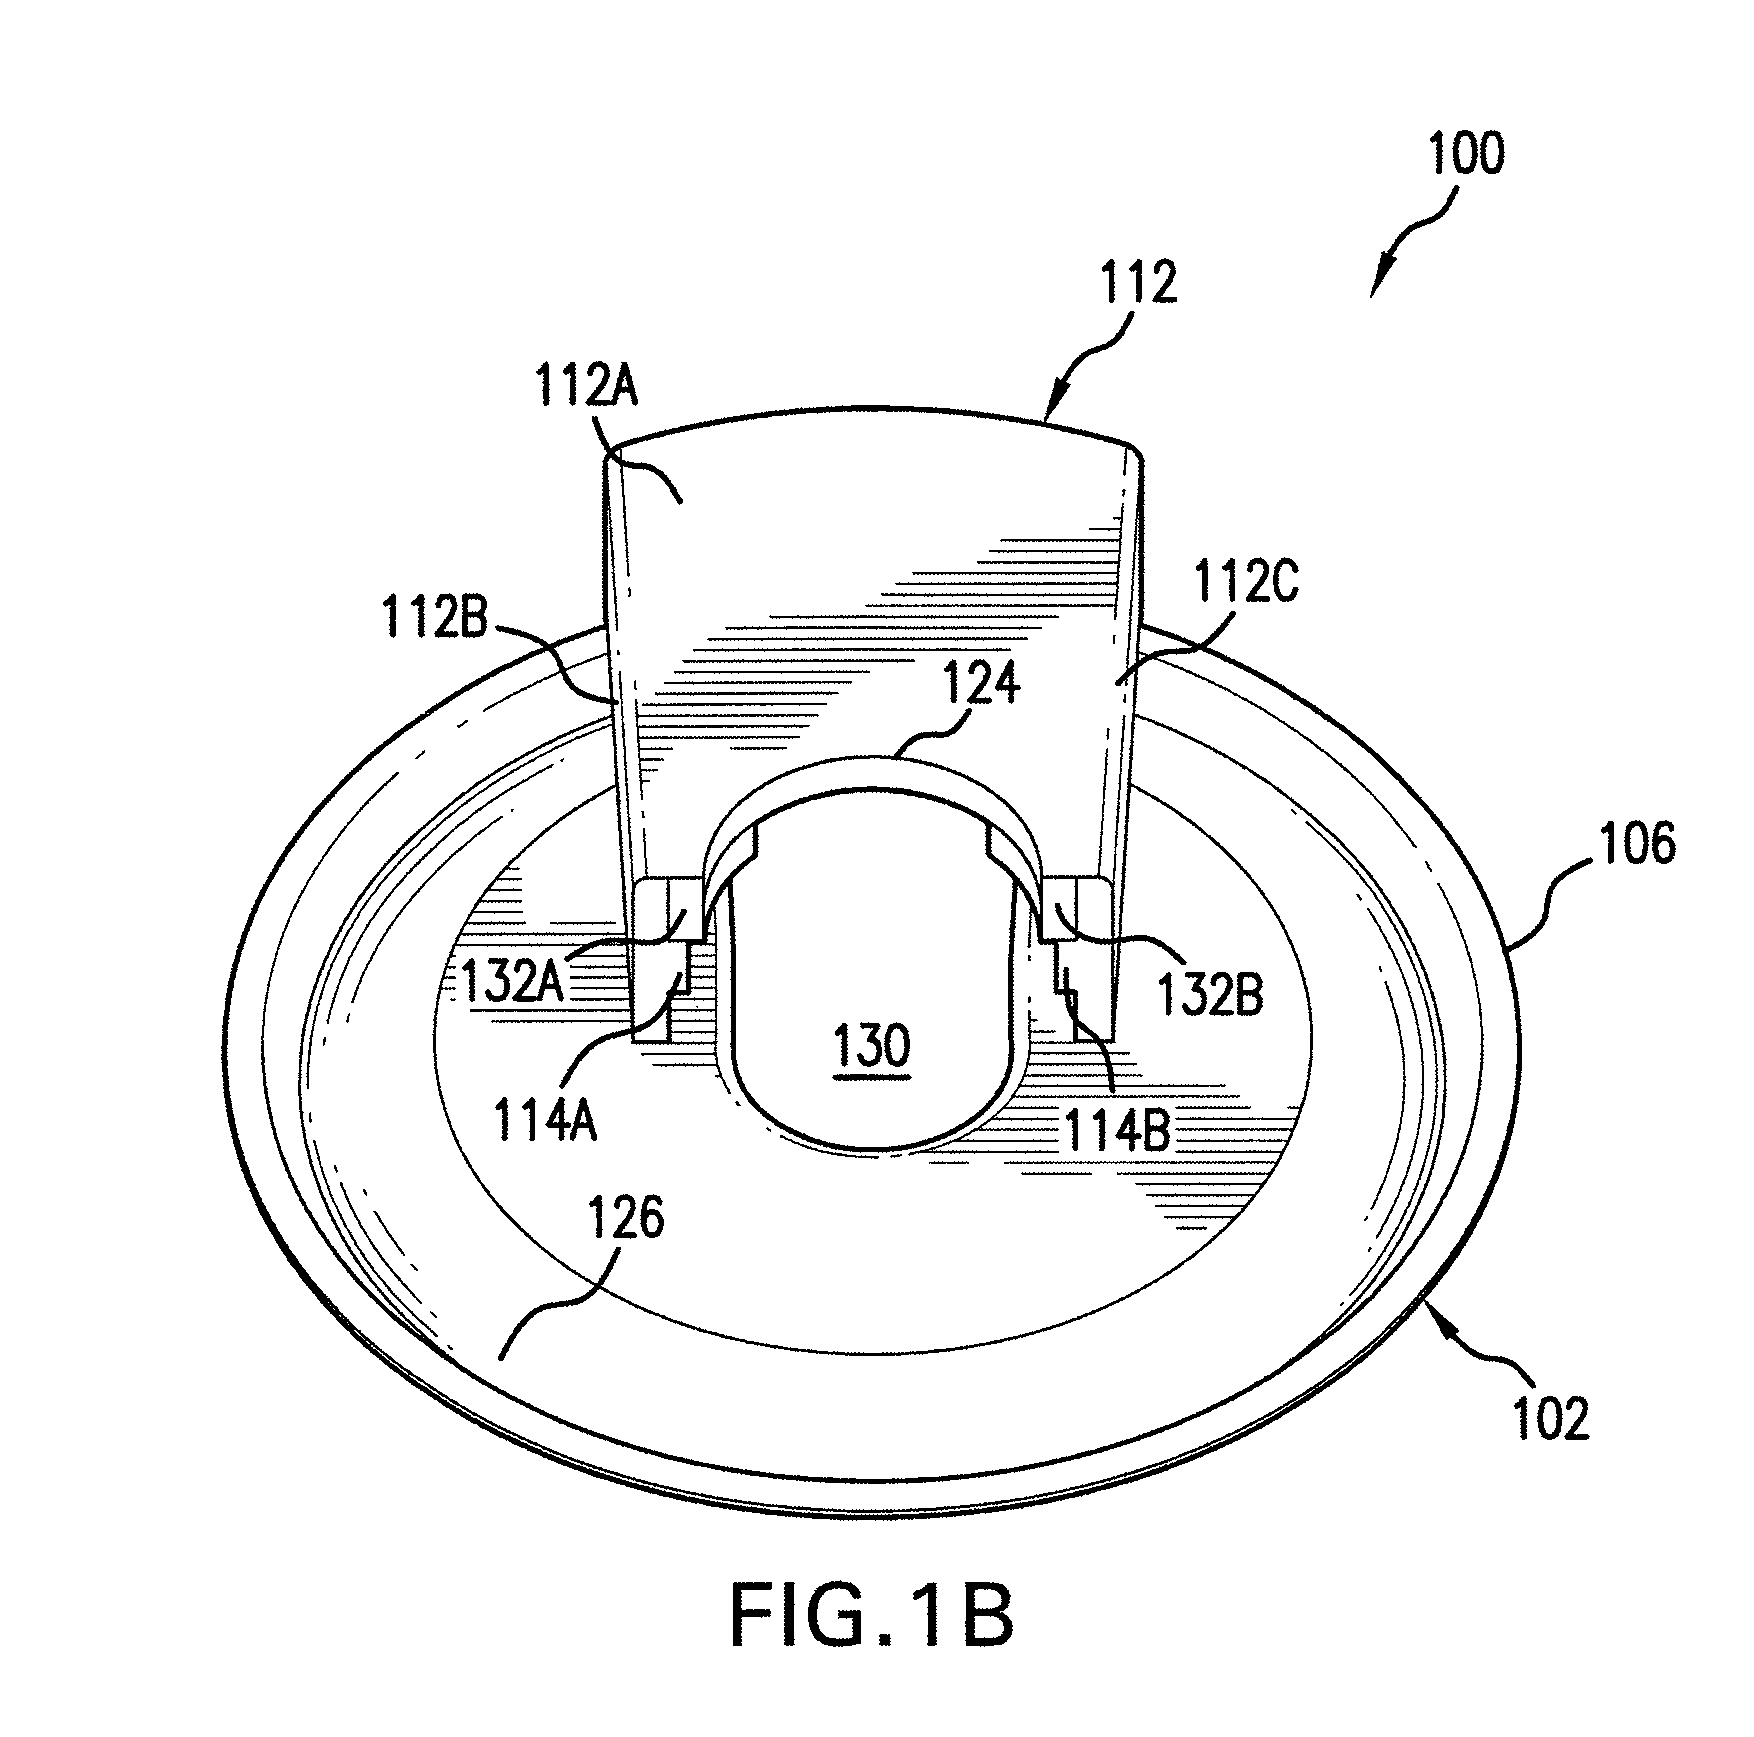 Needle safety guard adapted to attach to a liquid container